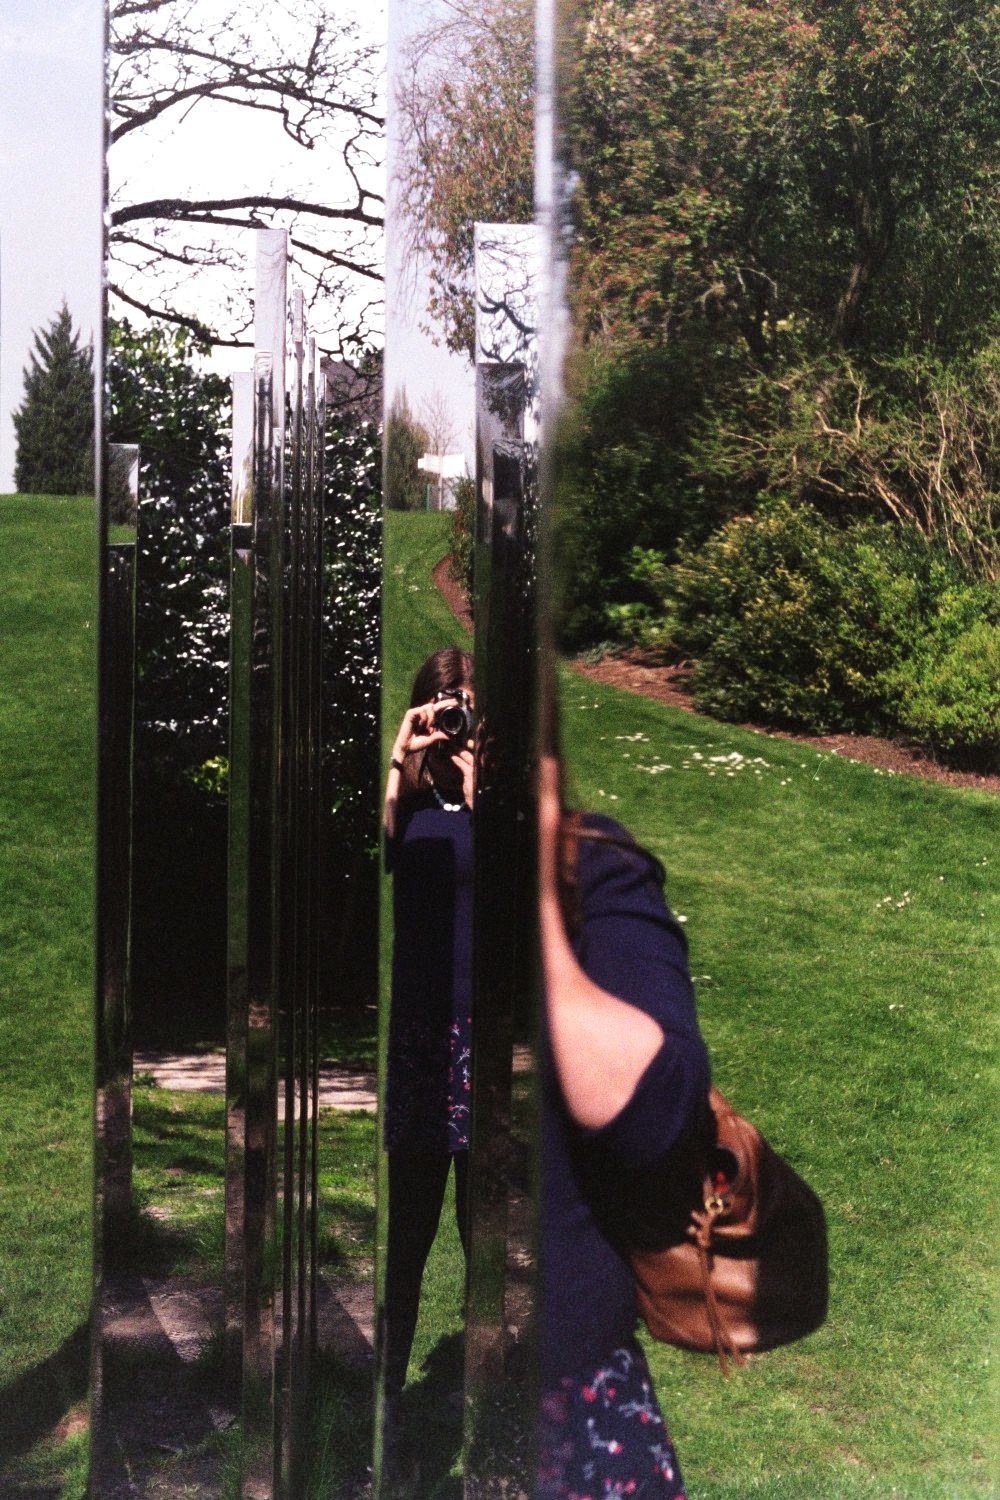 a person is taking a picture in a mirror